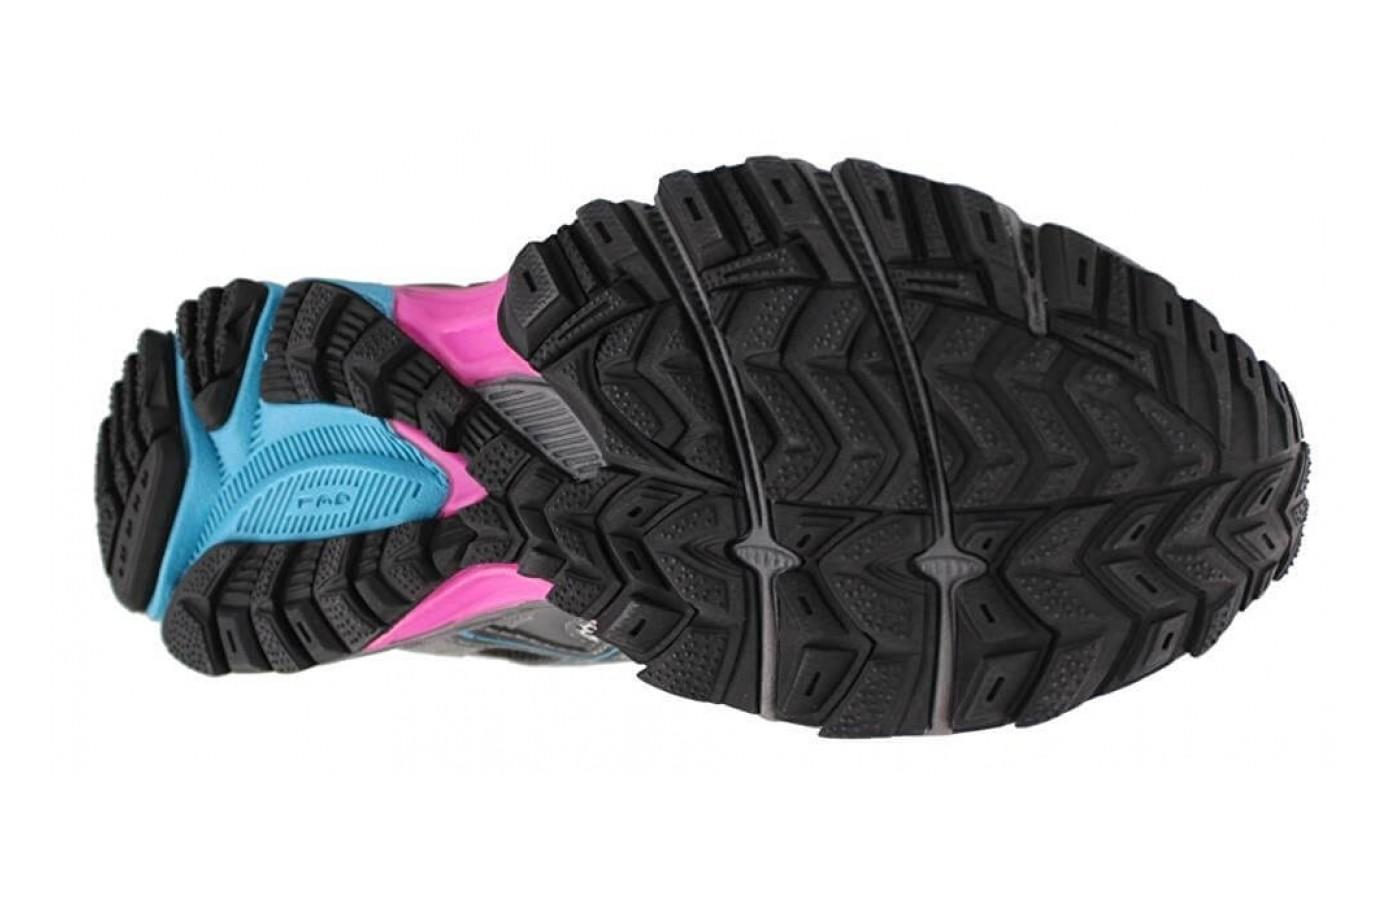 The impressive grippy AHAR outsole lugs provide tractionand the flex grooves assist with flexibility  for nimbler trail adventures 